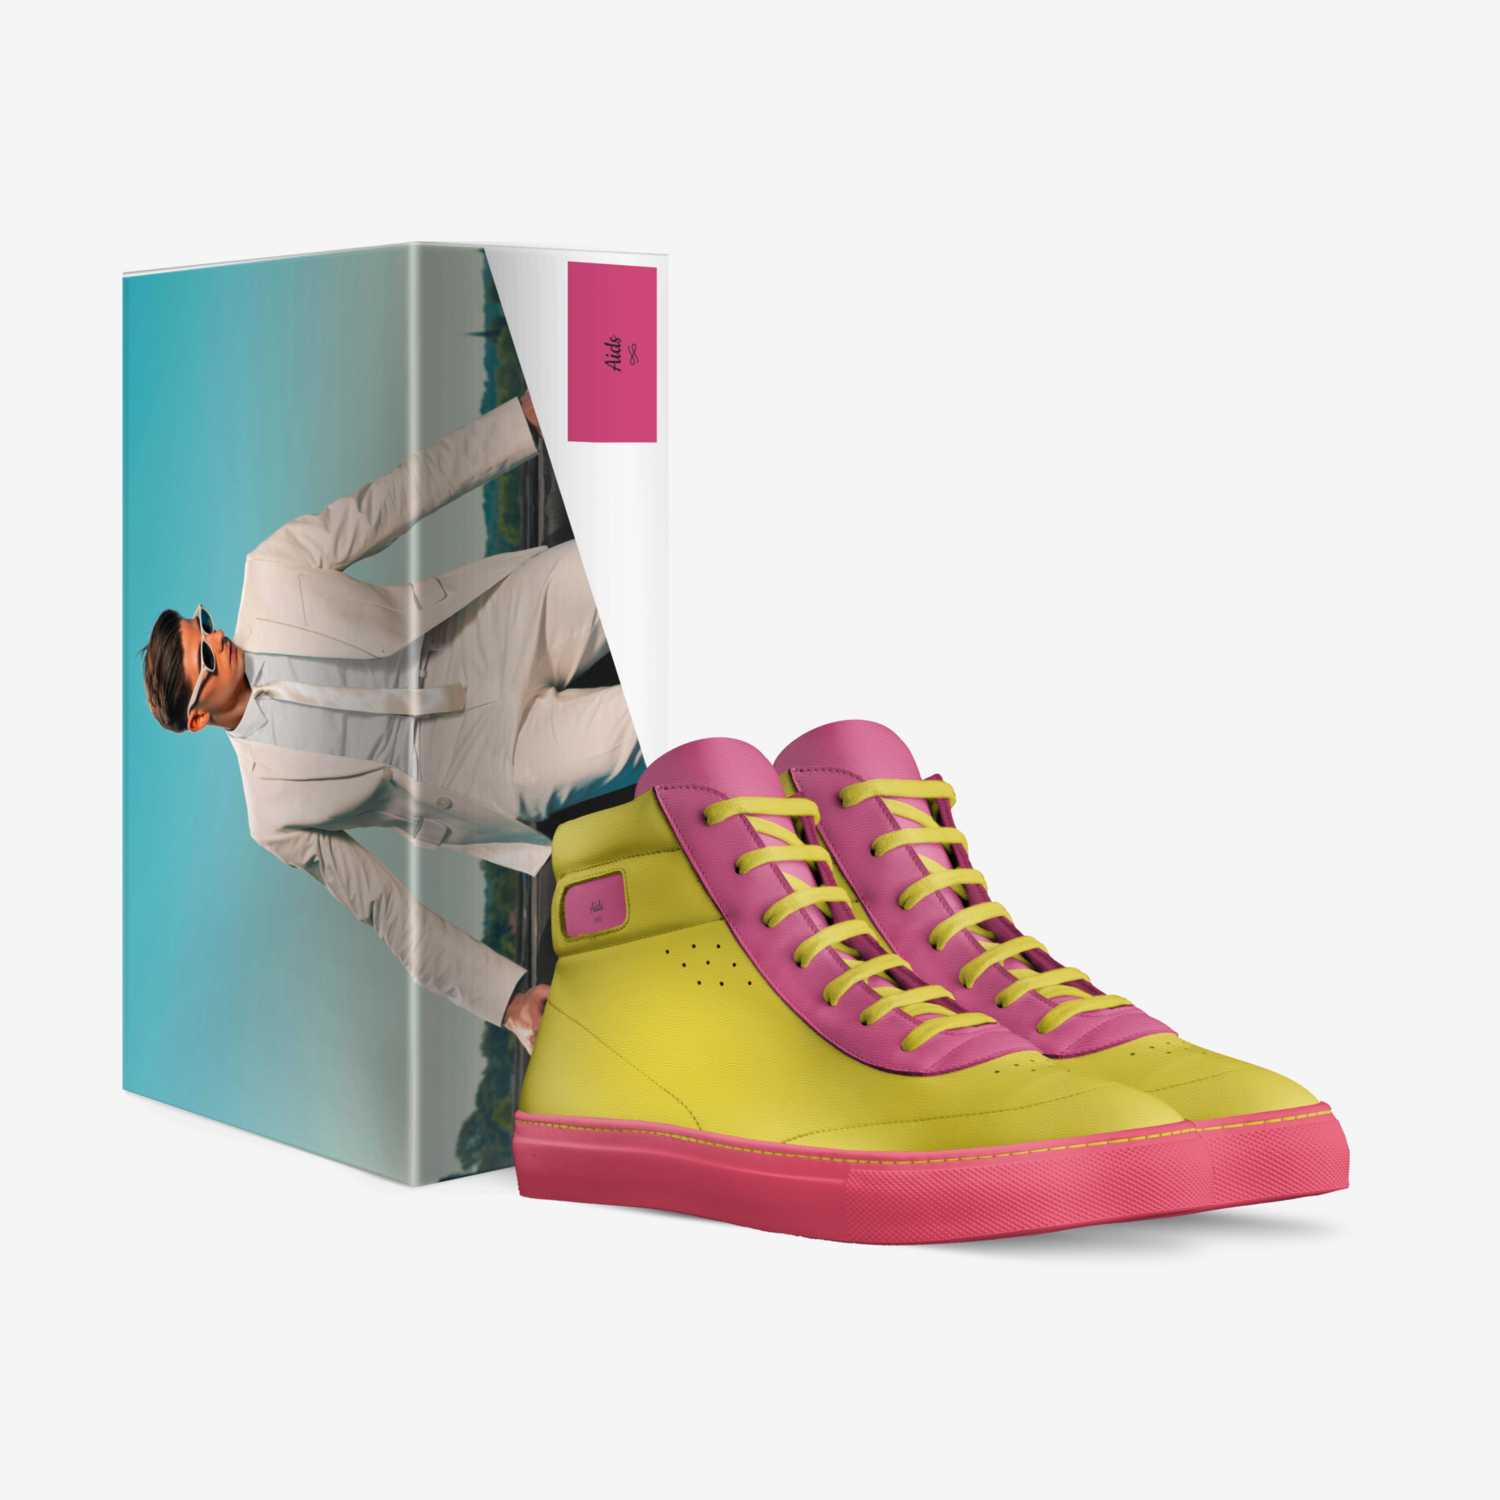 Aids custom made in Italy shoes by Aiden Addiscott | Box view